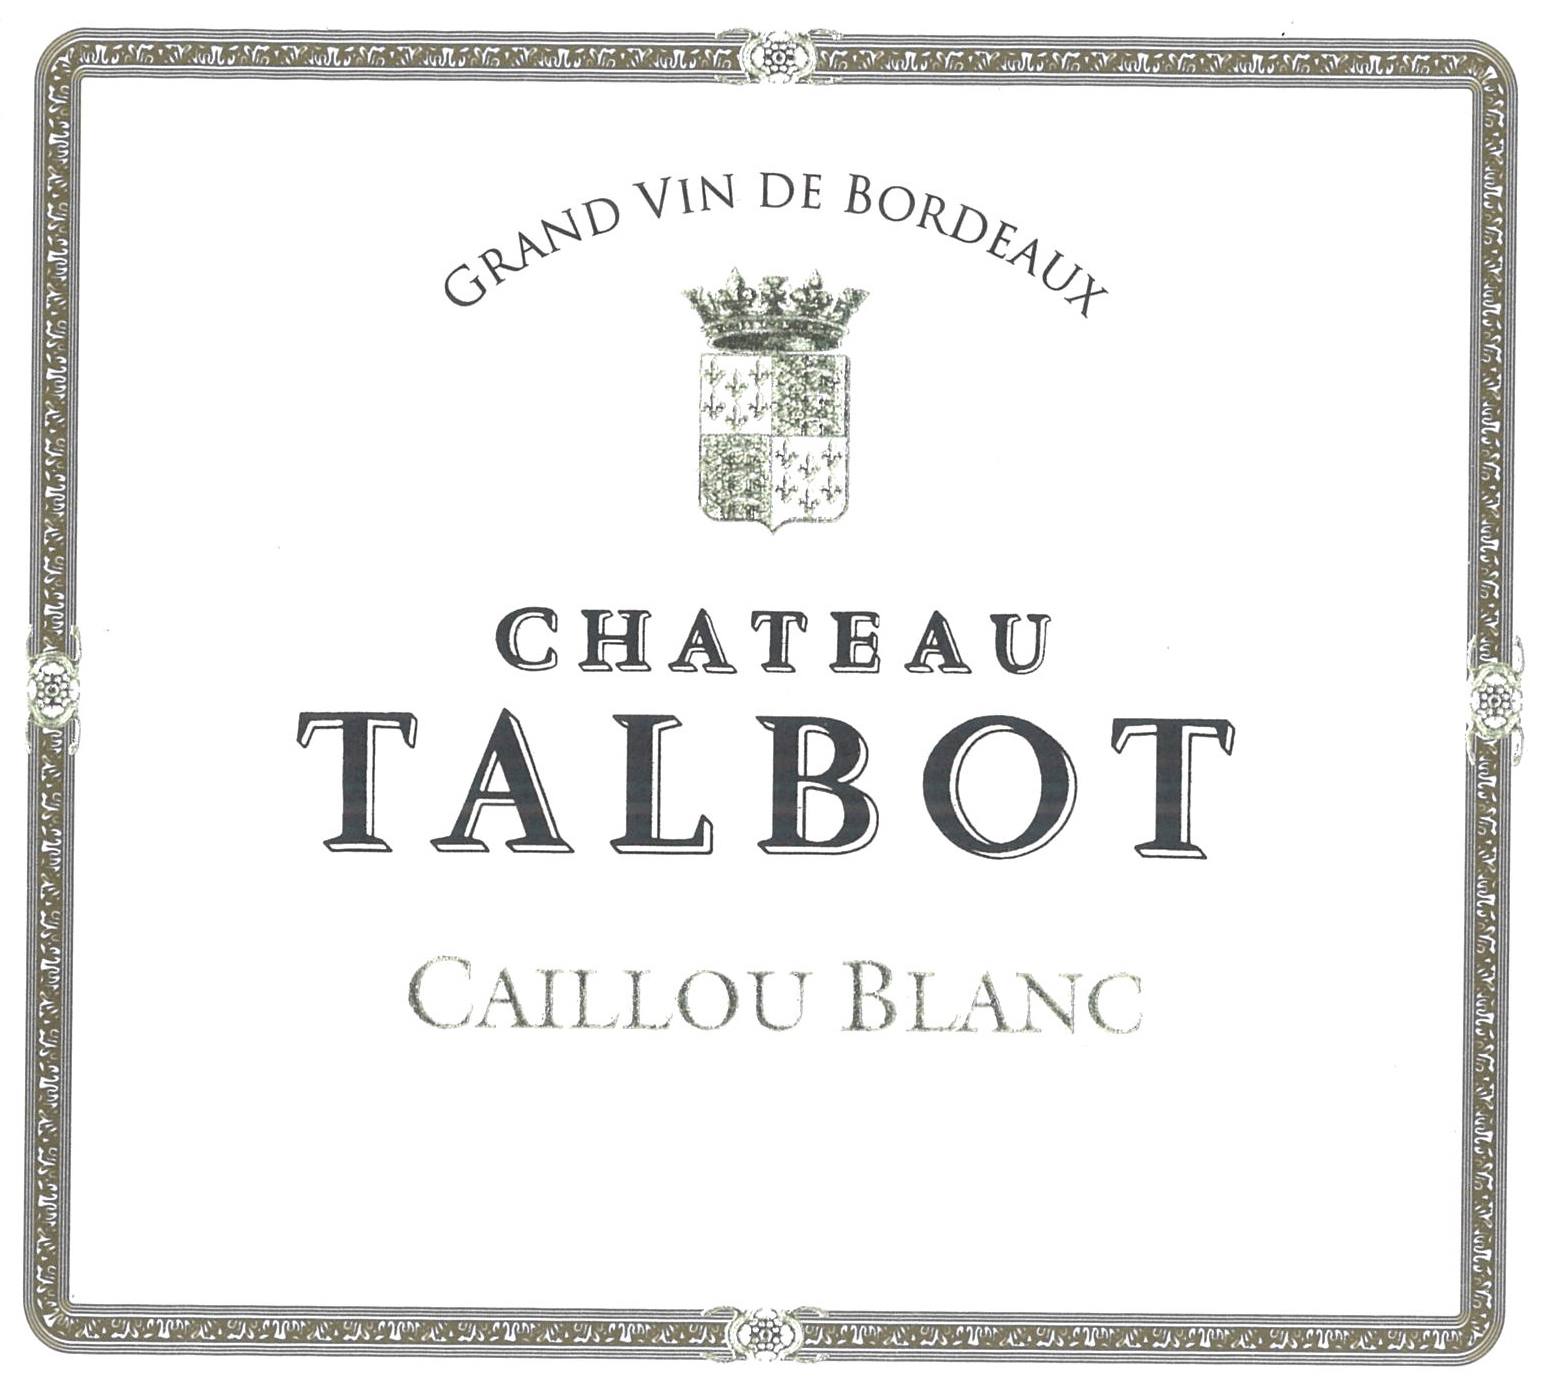 Chateau Talbot - Caillou Blanc label